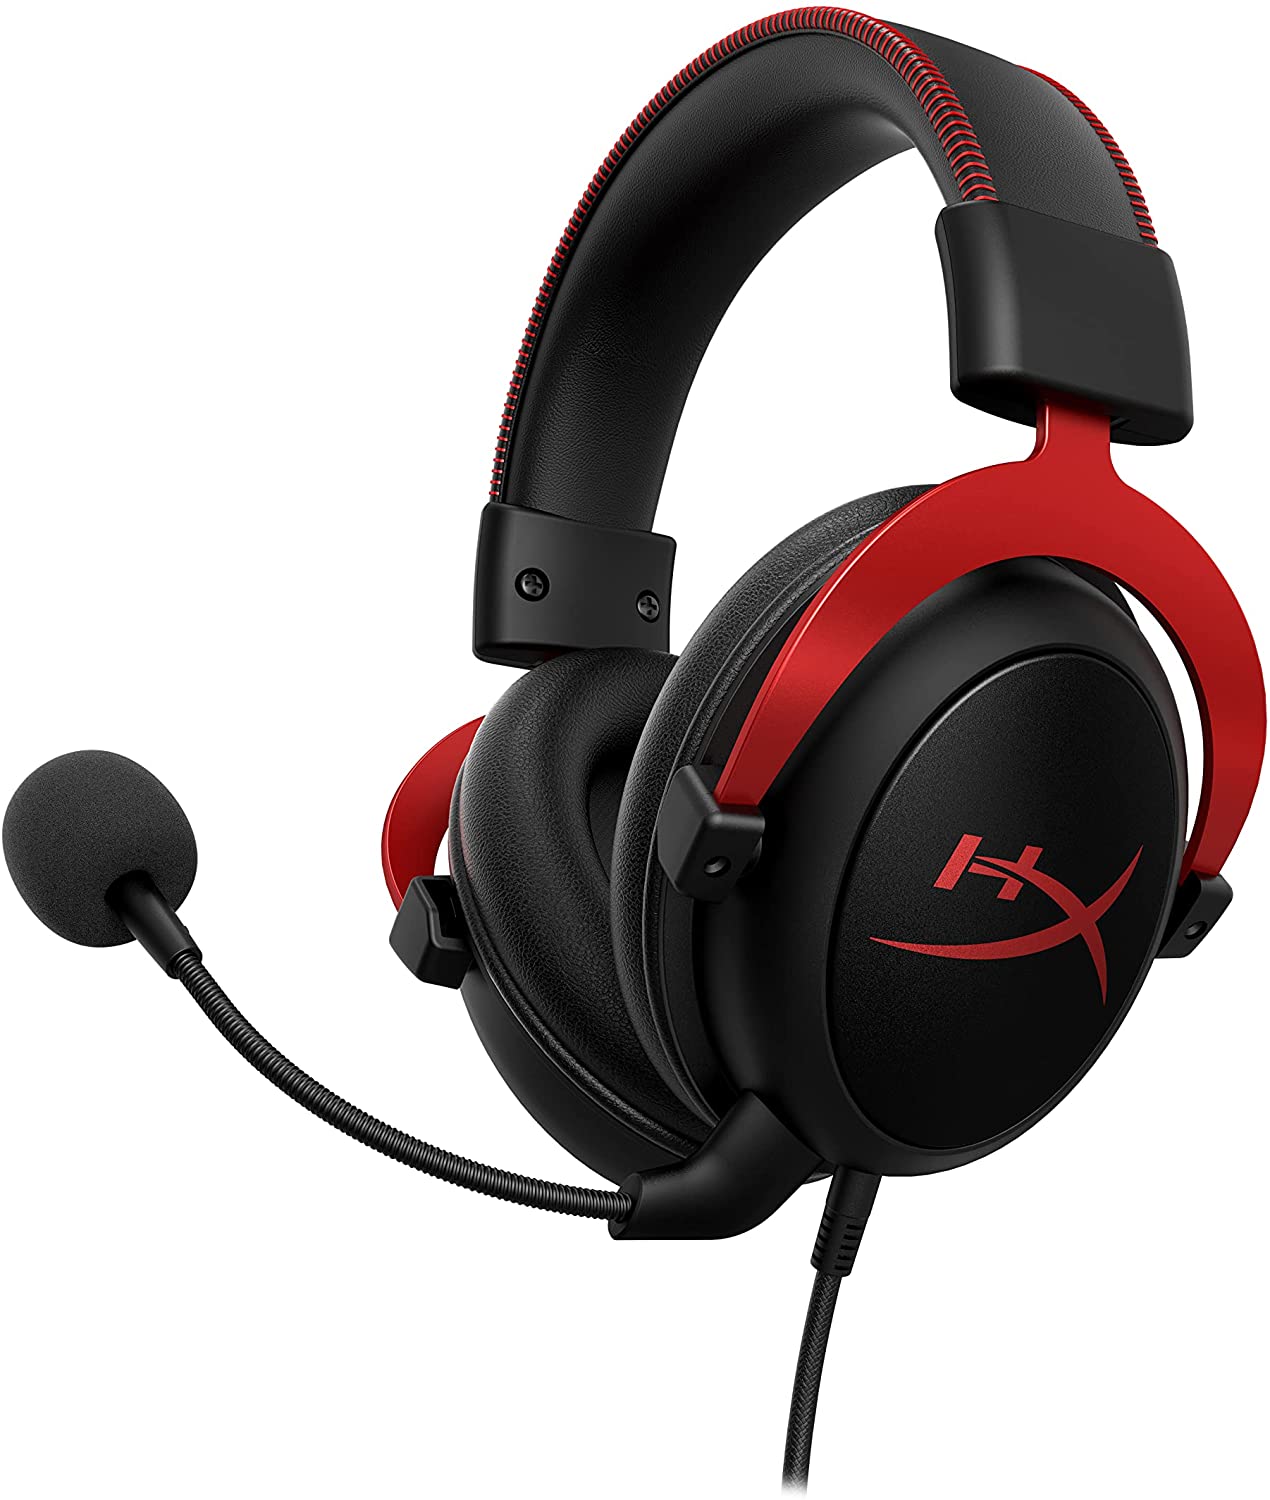 HyperX Cloud II - Gaming Headset, 7.1 Surround Sound, Memory Foam Ear Pads, Durable Aluminum Frame, Detachable Microphone, Works with All Platforms – Red $59